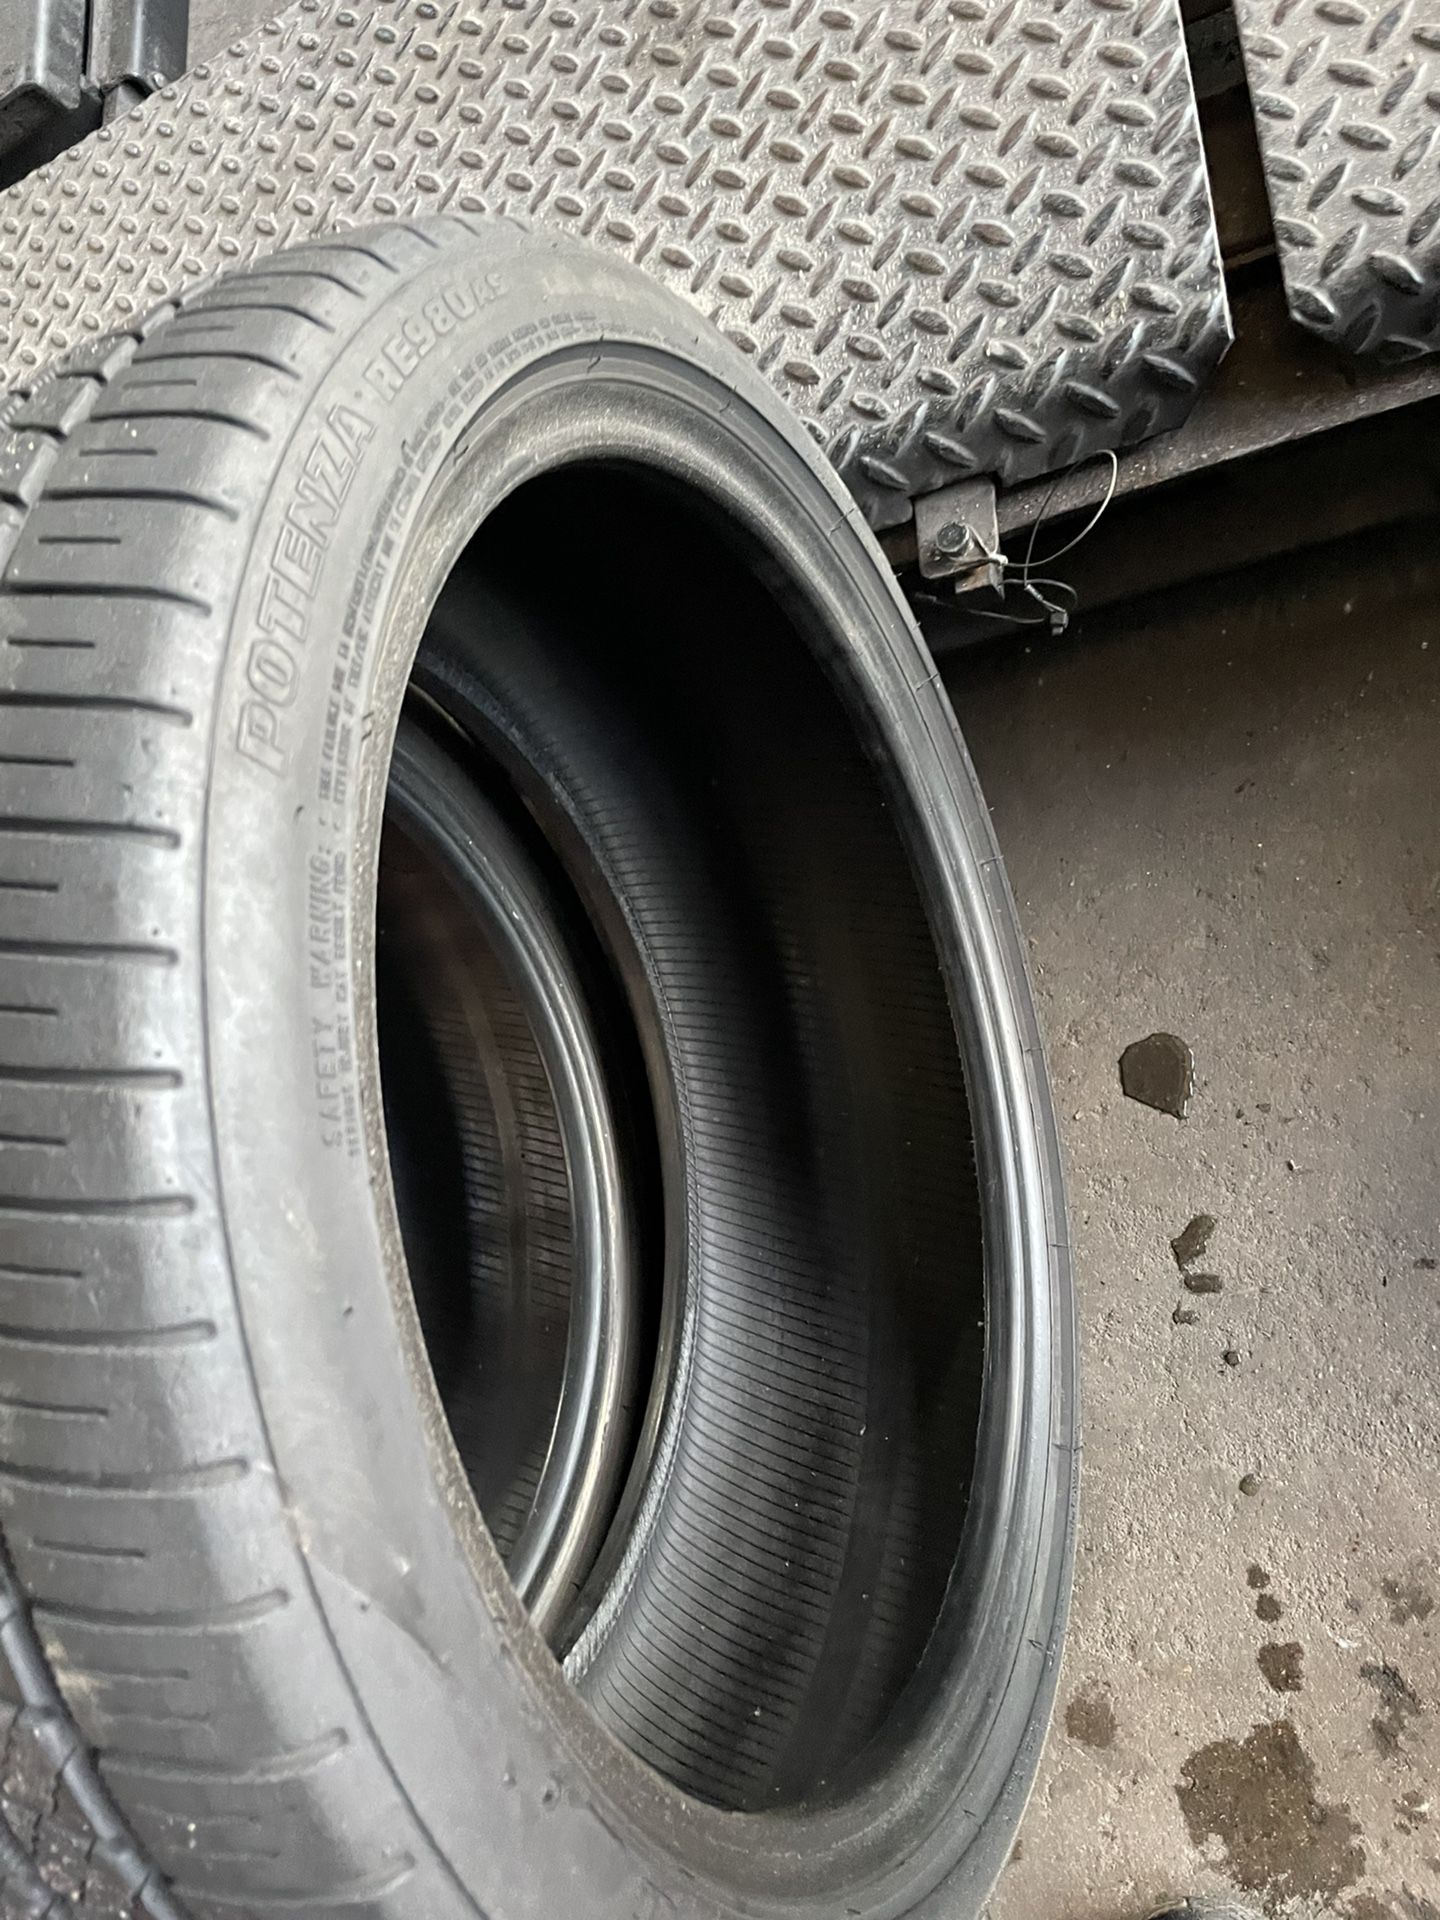 2 Used 22540R18 Bridgestone Potenza Run flat Tires For $120 for The Pair Picked Up Or $150 Installed And Balanced .  Texas Extreme Tire Co 1305 Presto